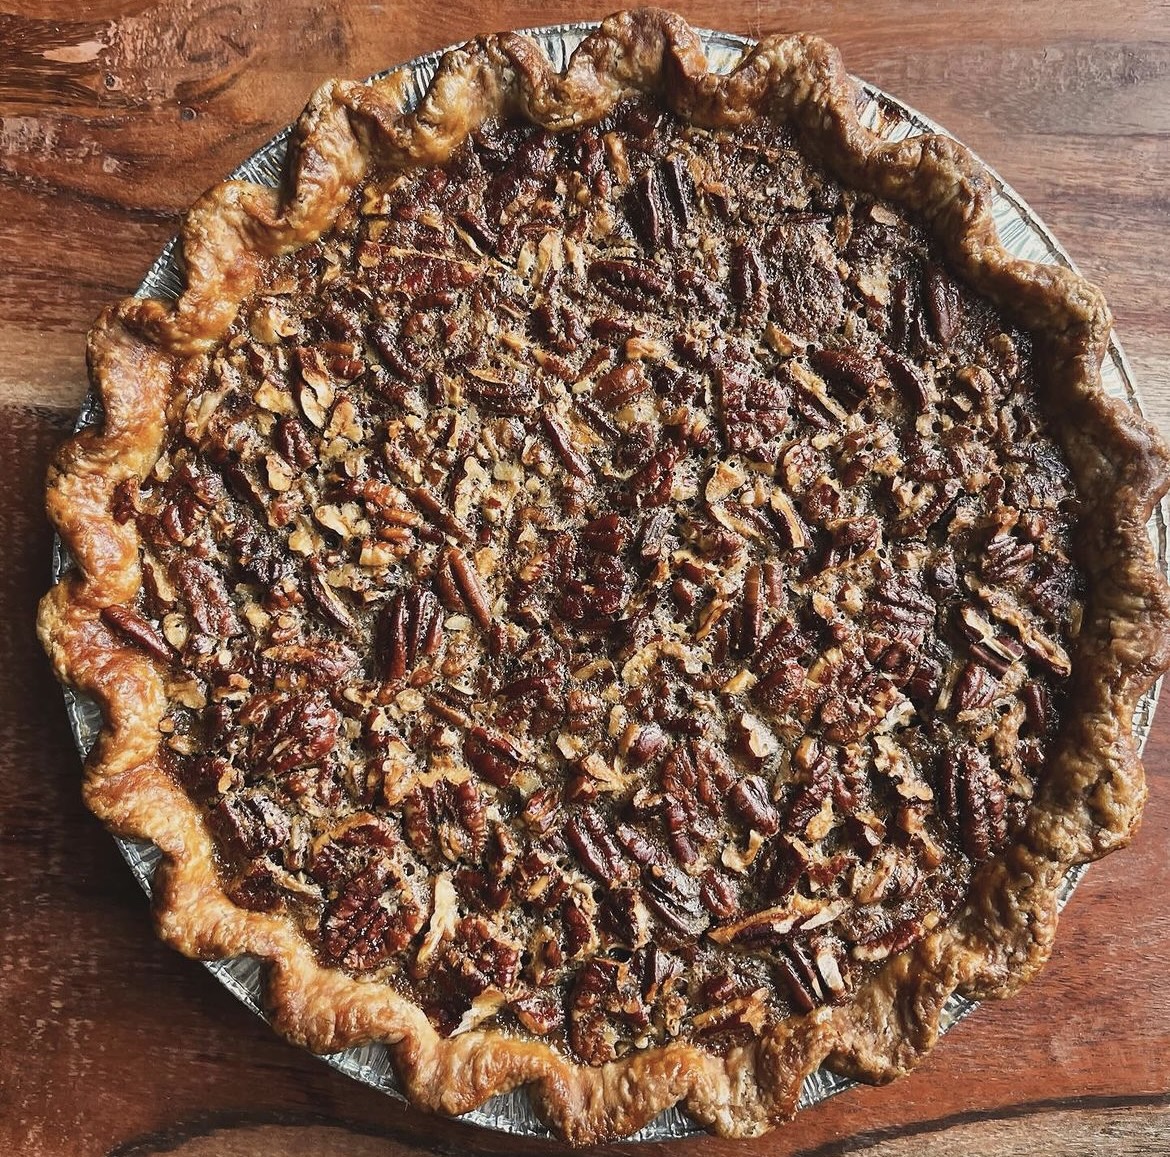 A photo of a pecan pie from Piebird, a great place to order from for Pi Day.